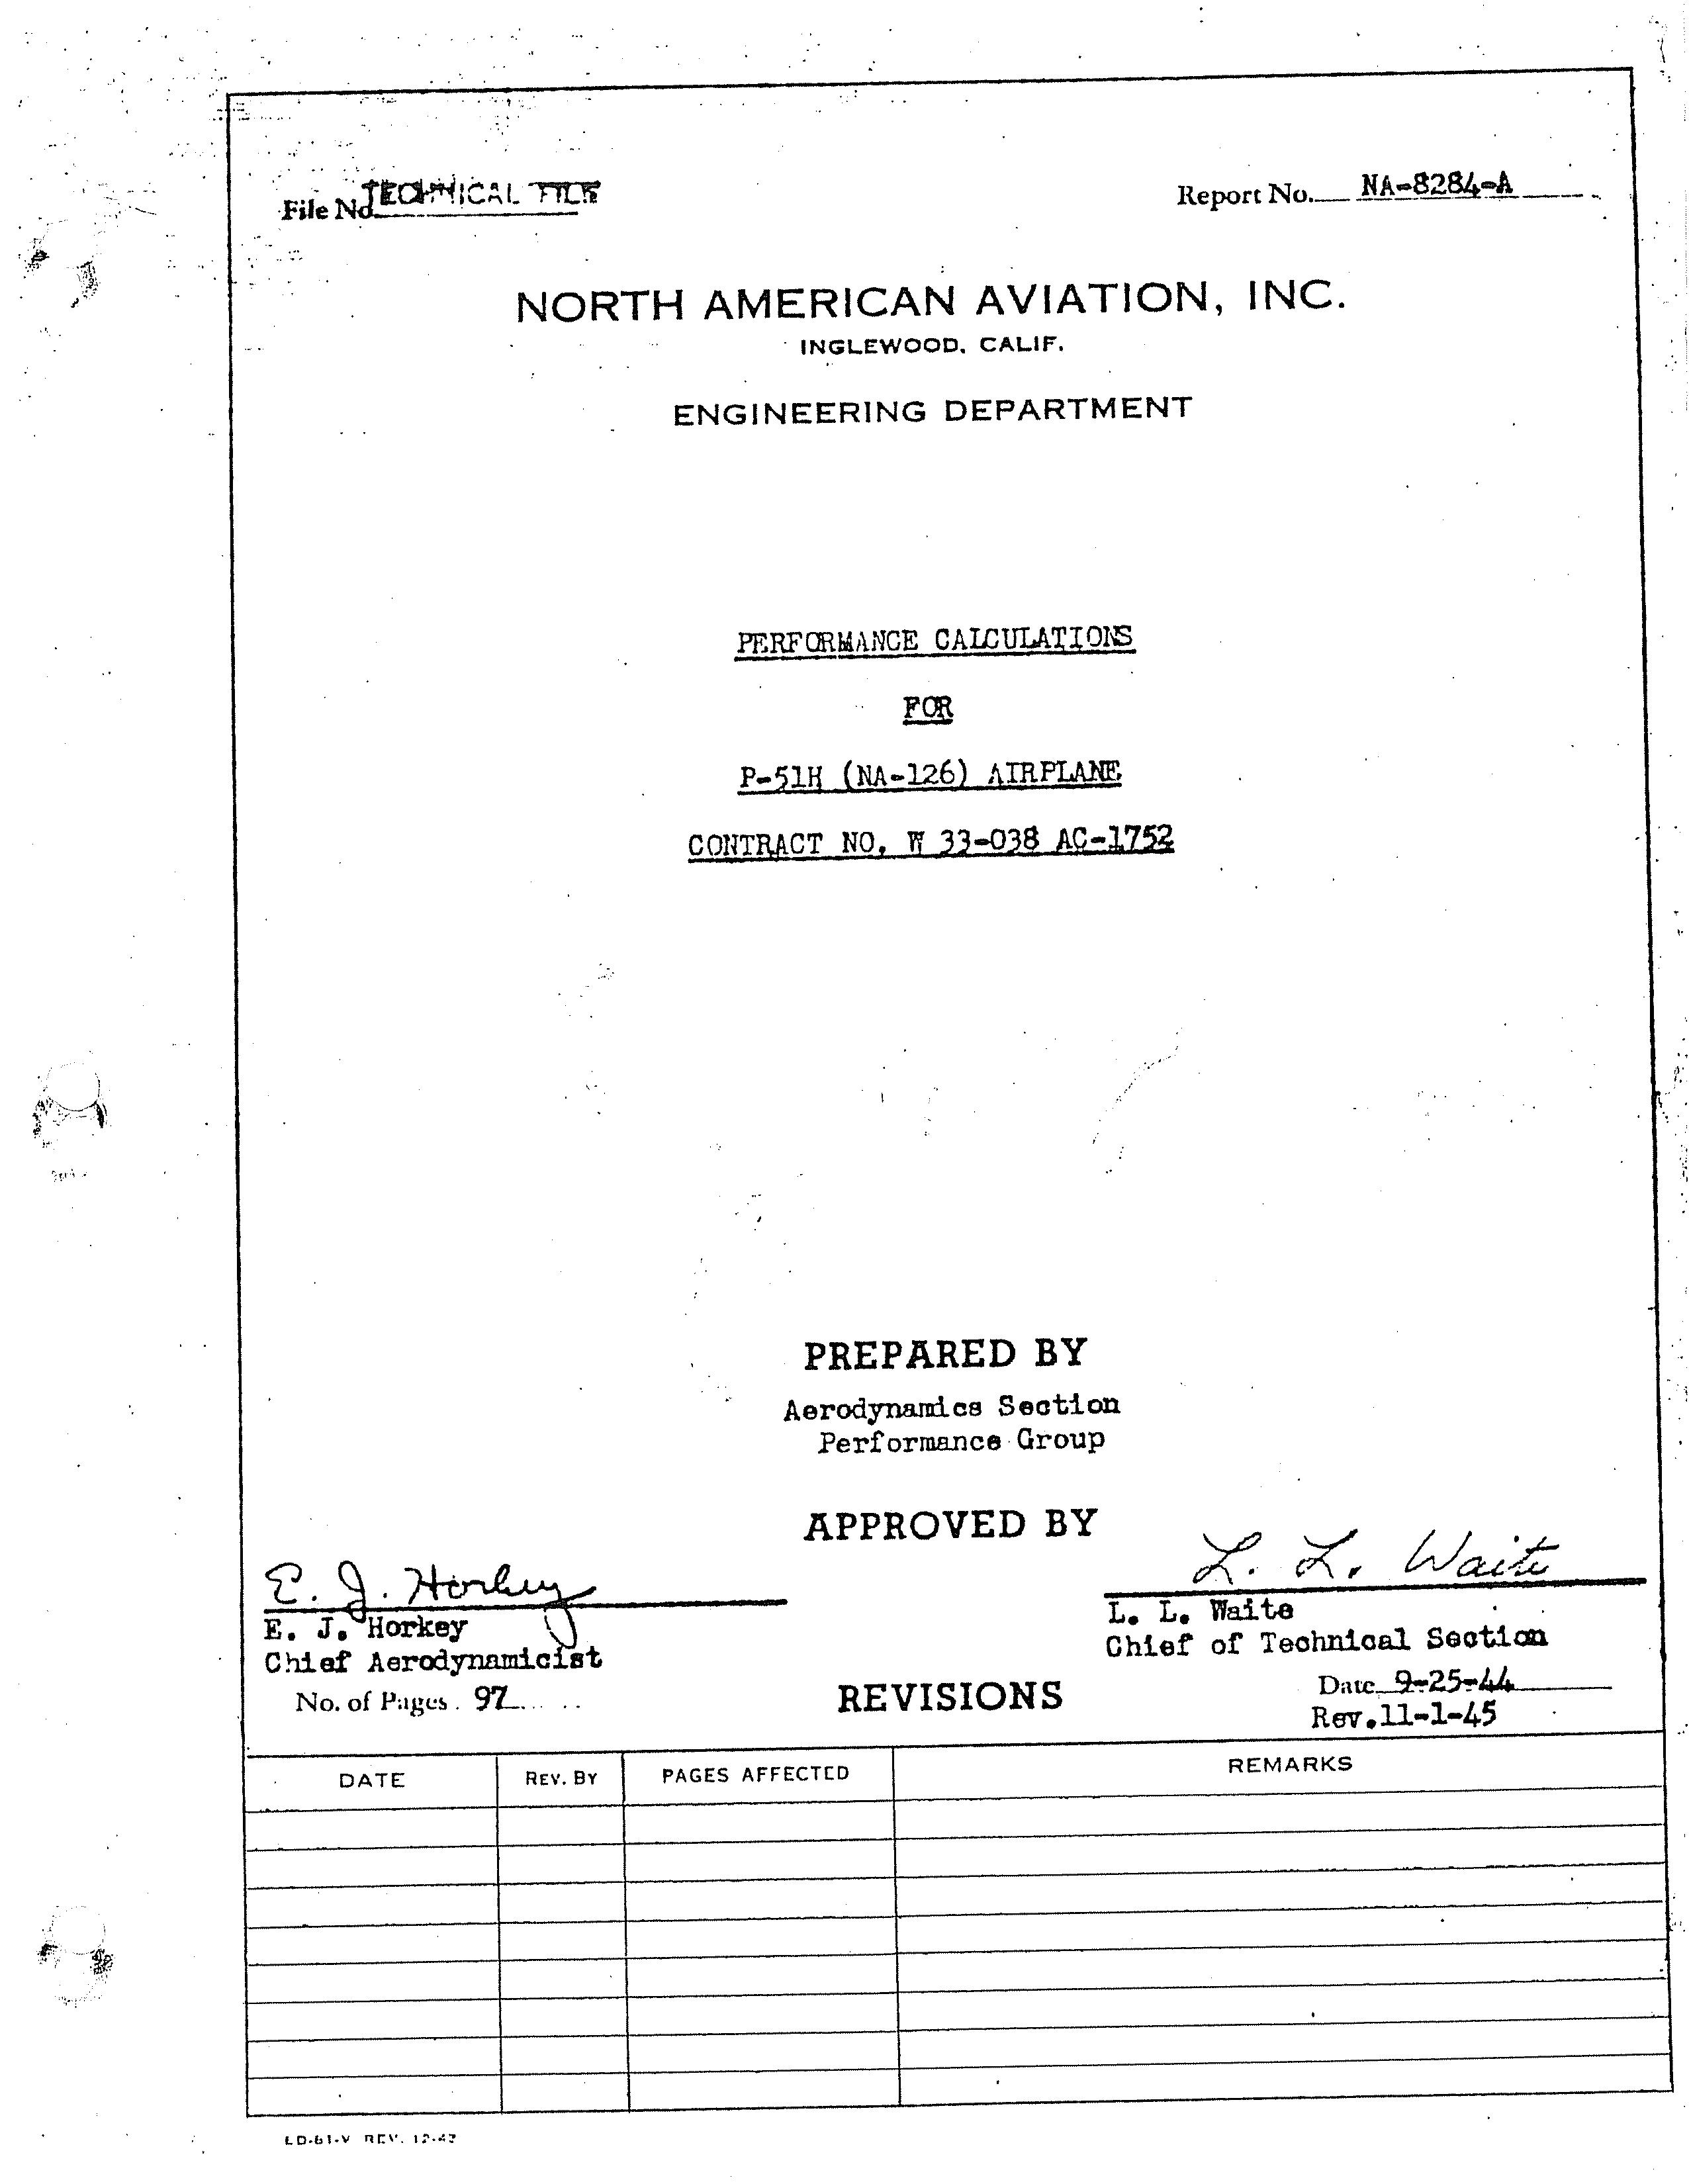 Sample page 1 from AirCorps Library document: Performance Calculations for P-51H (NA-126) Airplanes